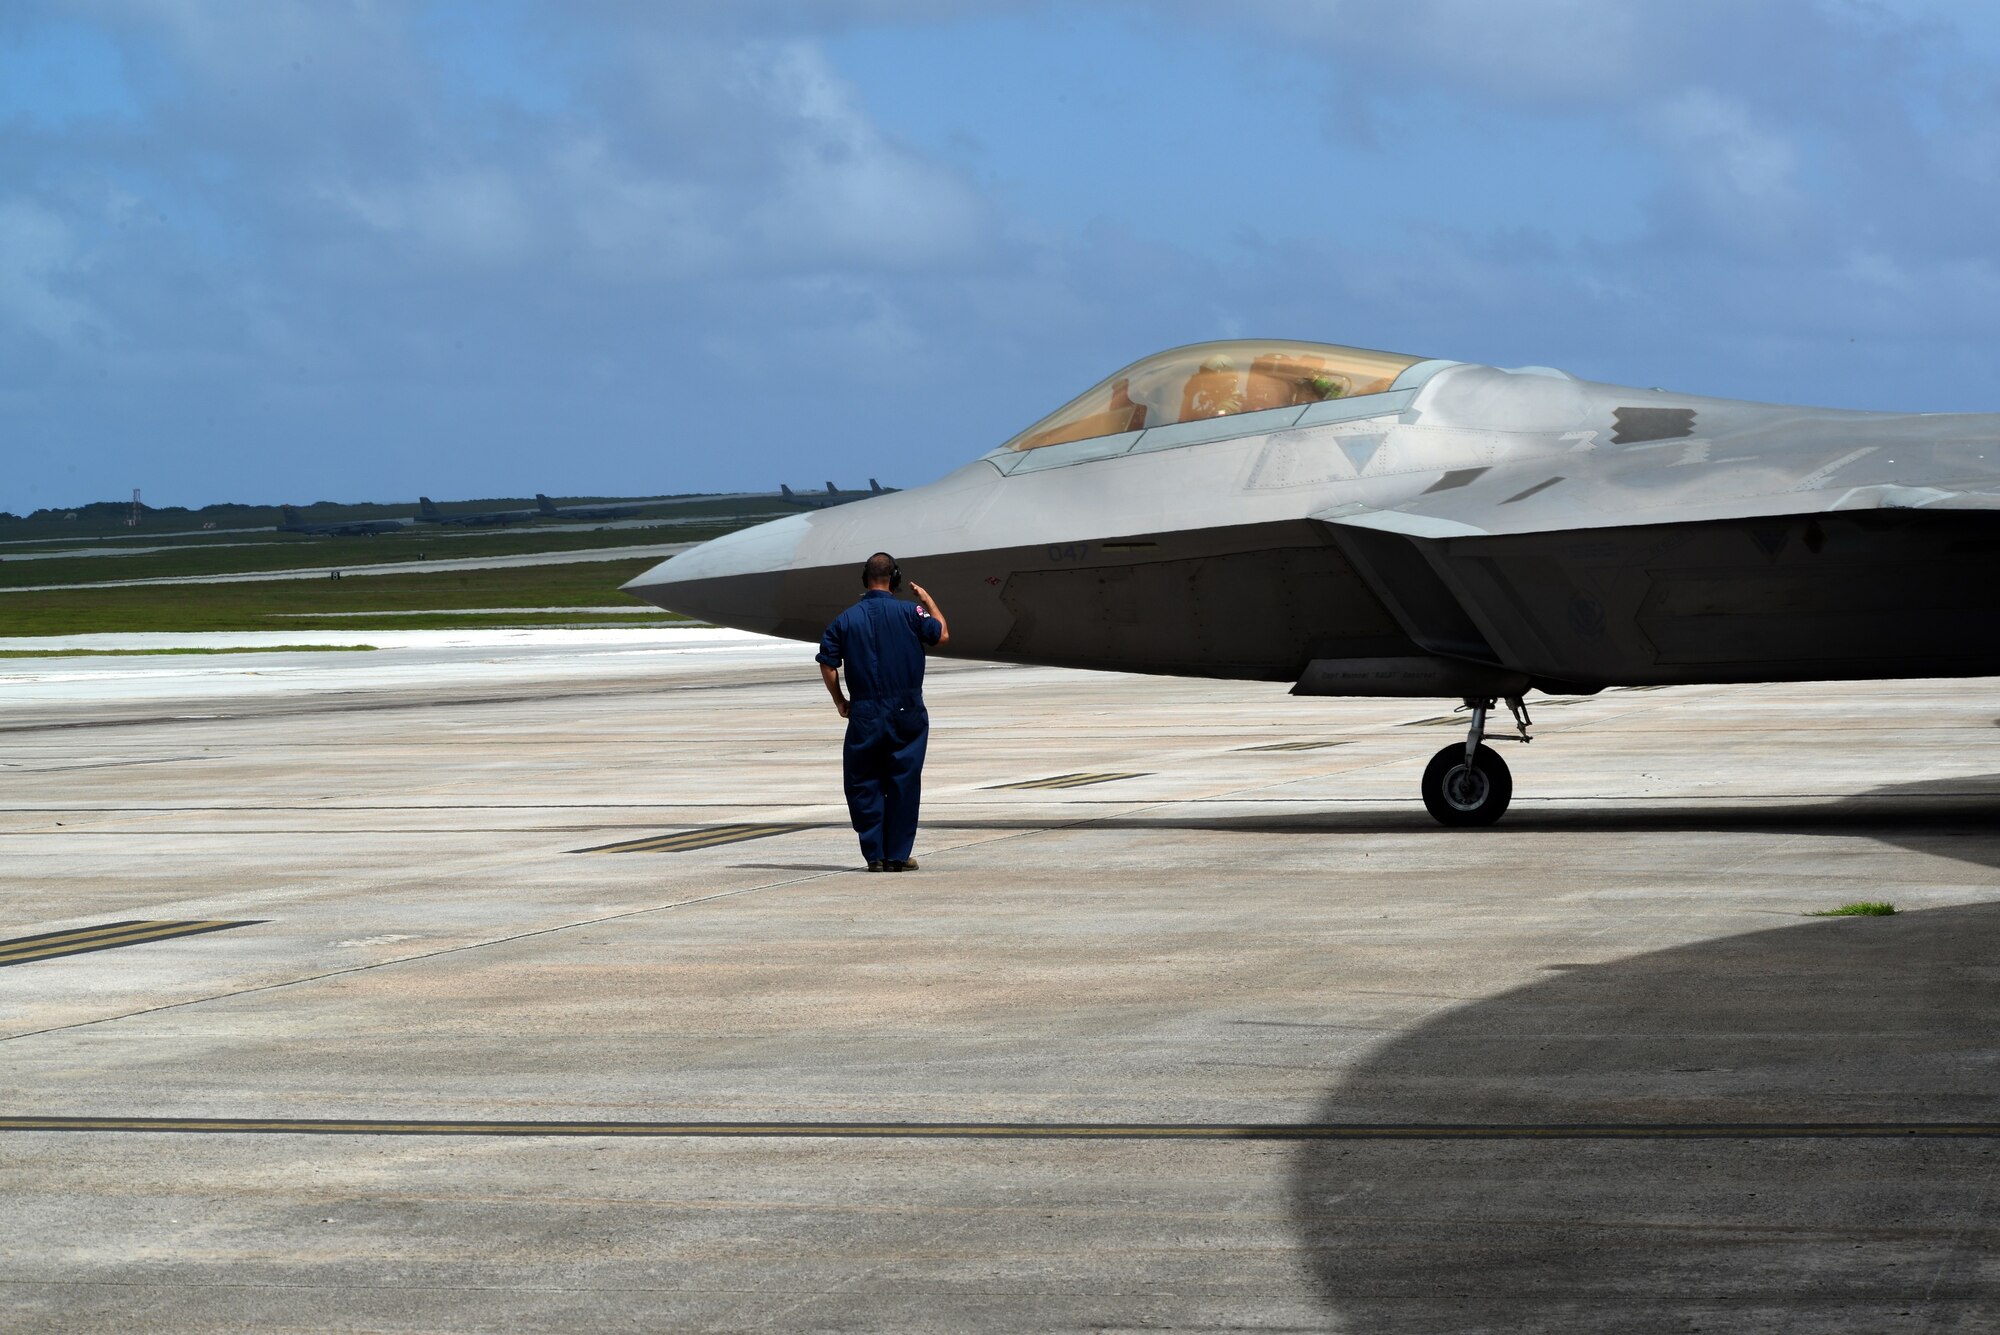 Master Sgt. Shawn Pangborn, 154th Aircraft Maintenance Squadron F-22 Raptor crew chief from Joint Base Pearl Harbor-Hickam, Hawaii salutes as an F-22 departs the hangar Nov. 23, 2014, at Andersen Air Force Base, Guam. A C-17 Globemaster III along with several F-22s operated from Andersen to practice flexibility in aircraft movement at a non-traditional base with additional pilots, maintenance support and accompanying fuel and munitions. (U.S. Air Force photo by Airman 1st Class Amanda Morris/Released)